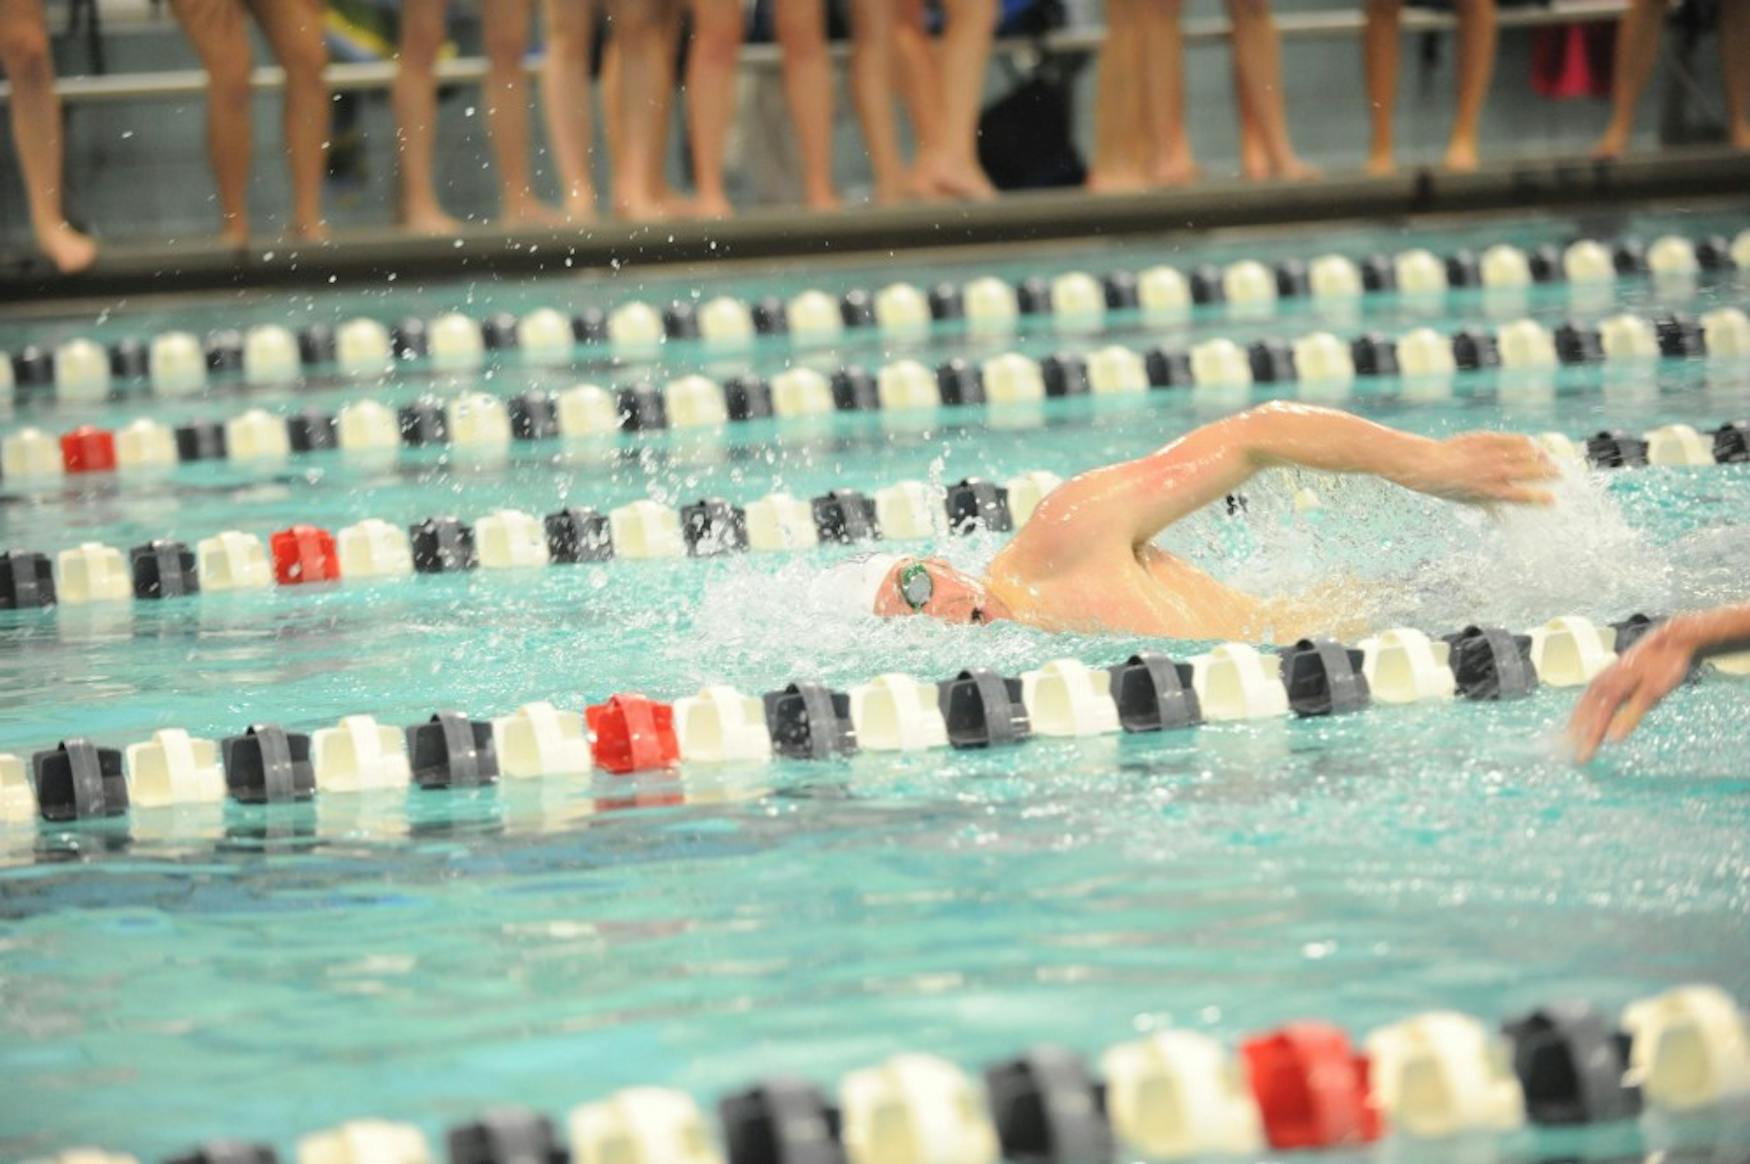 AHEAD OF THE PACE: Max Fabian ’15, who took fourth in the 1,650-yard freestyle on Saturday, races at home on Oct. 18.